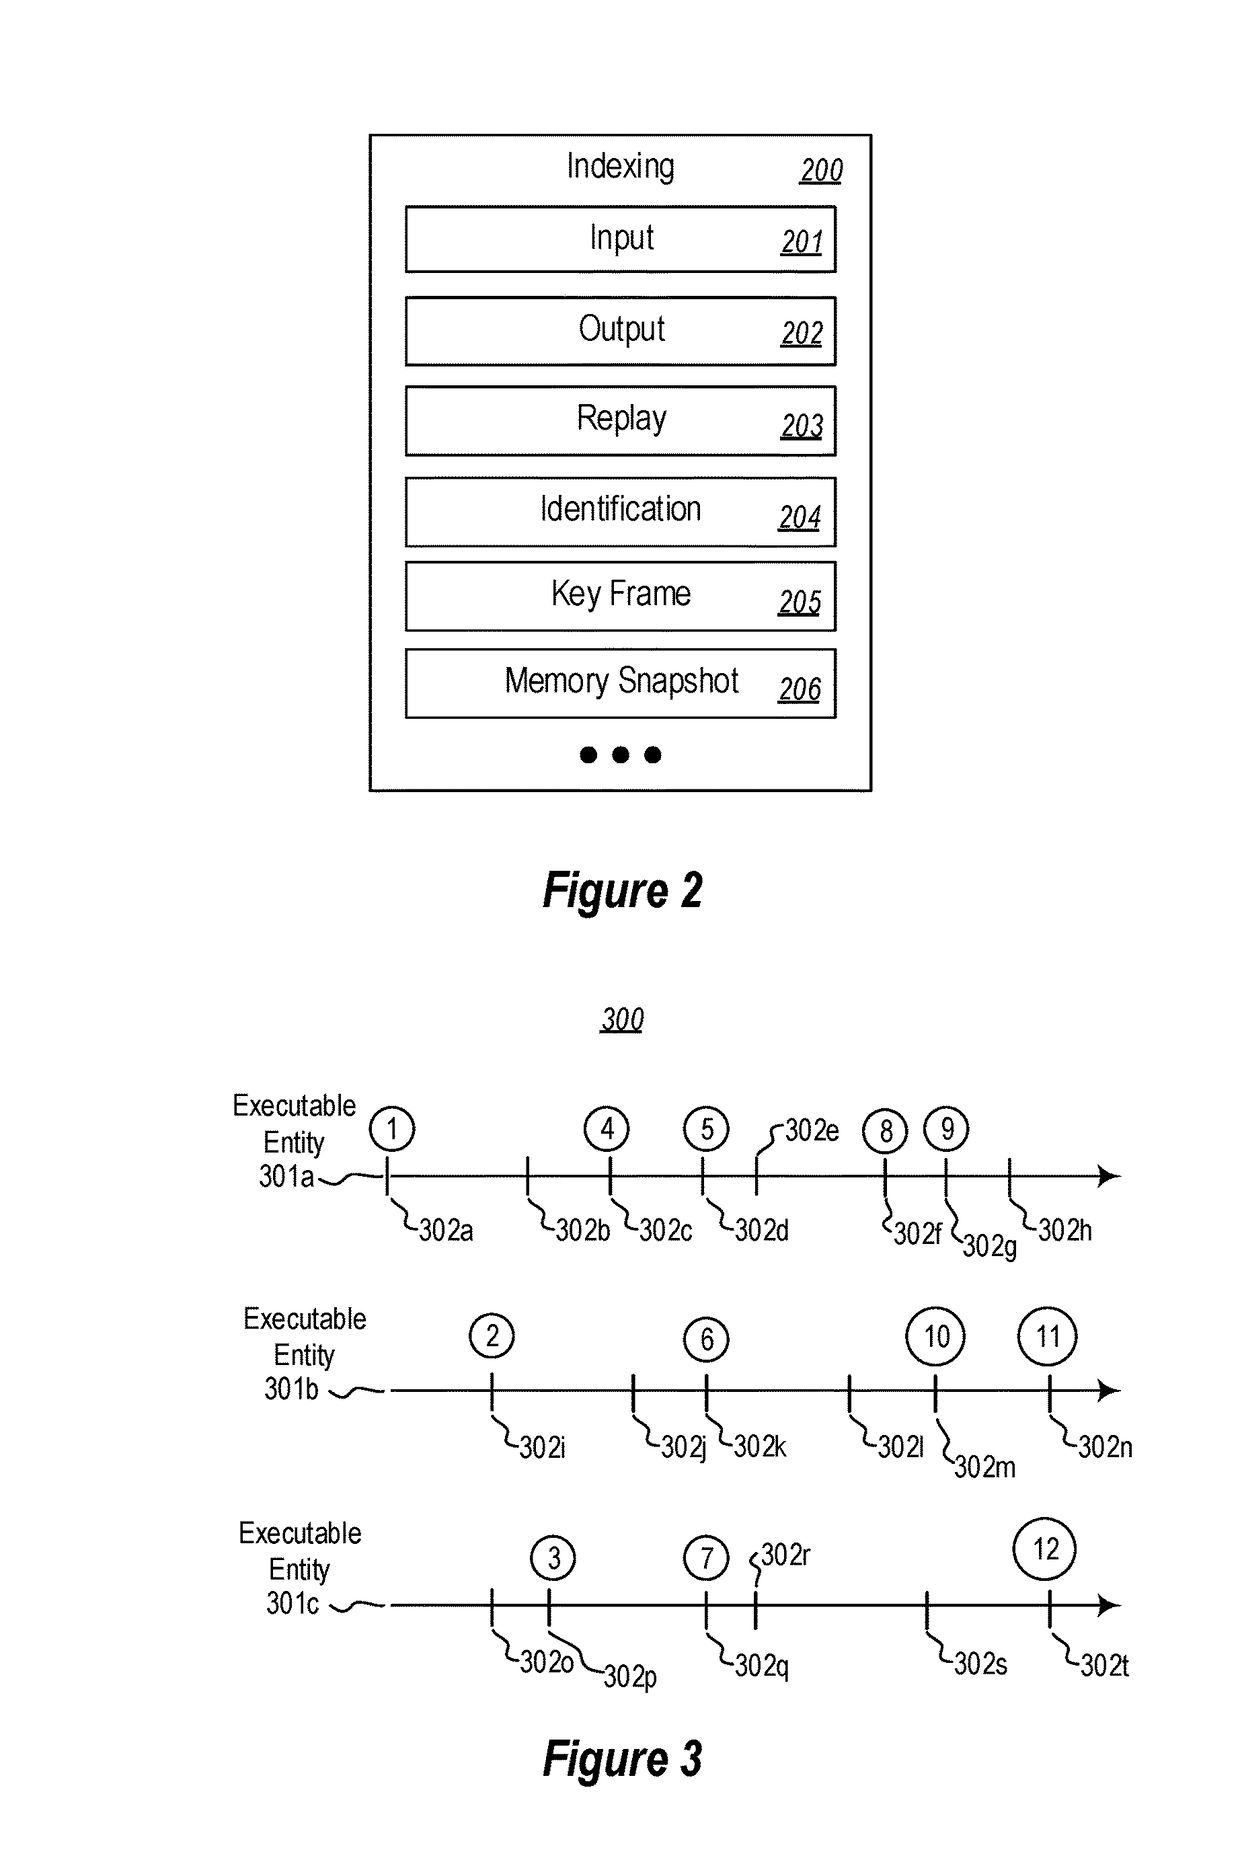 Indexing a trace by insertion of memory snapshots for replay responsiveness